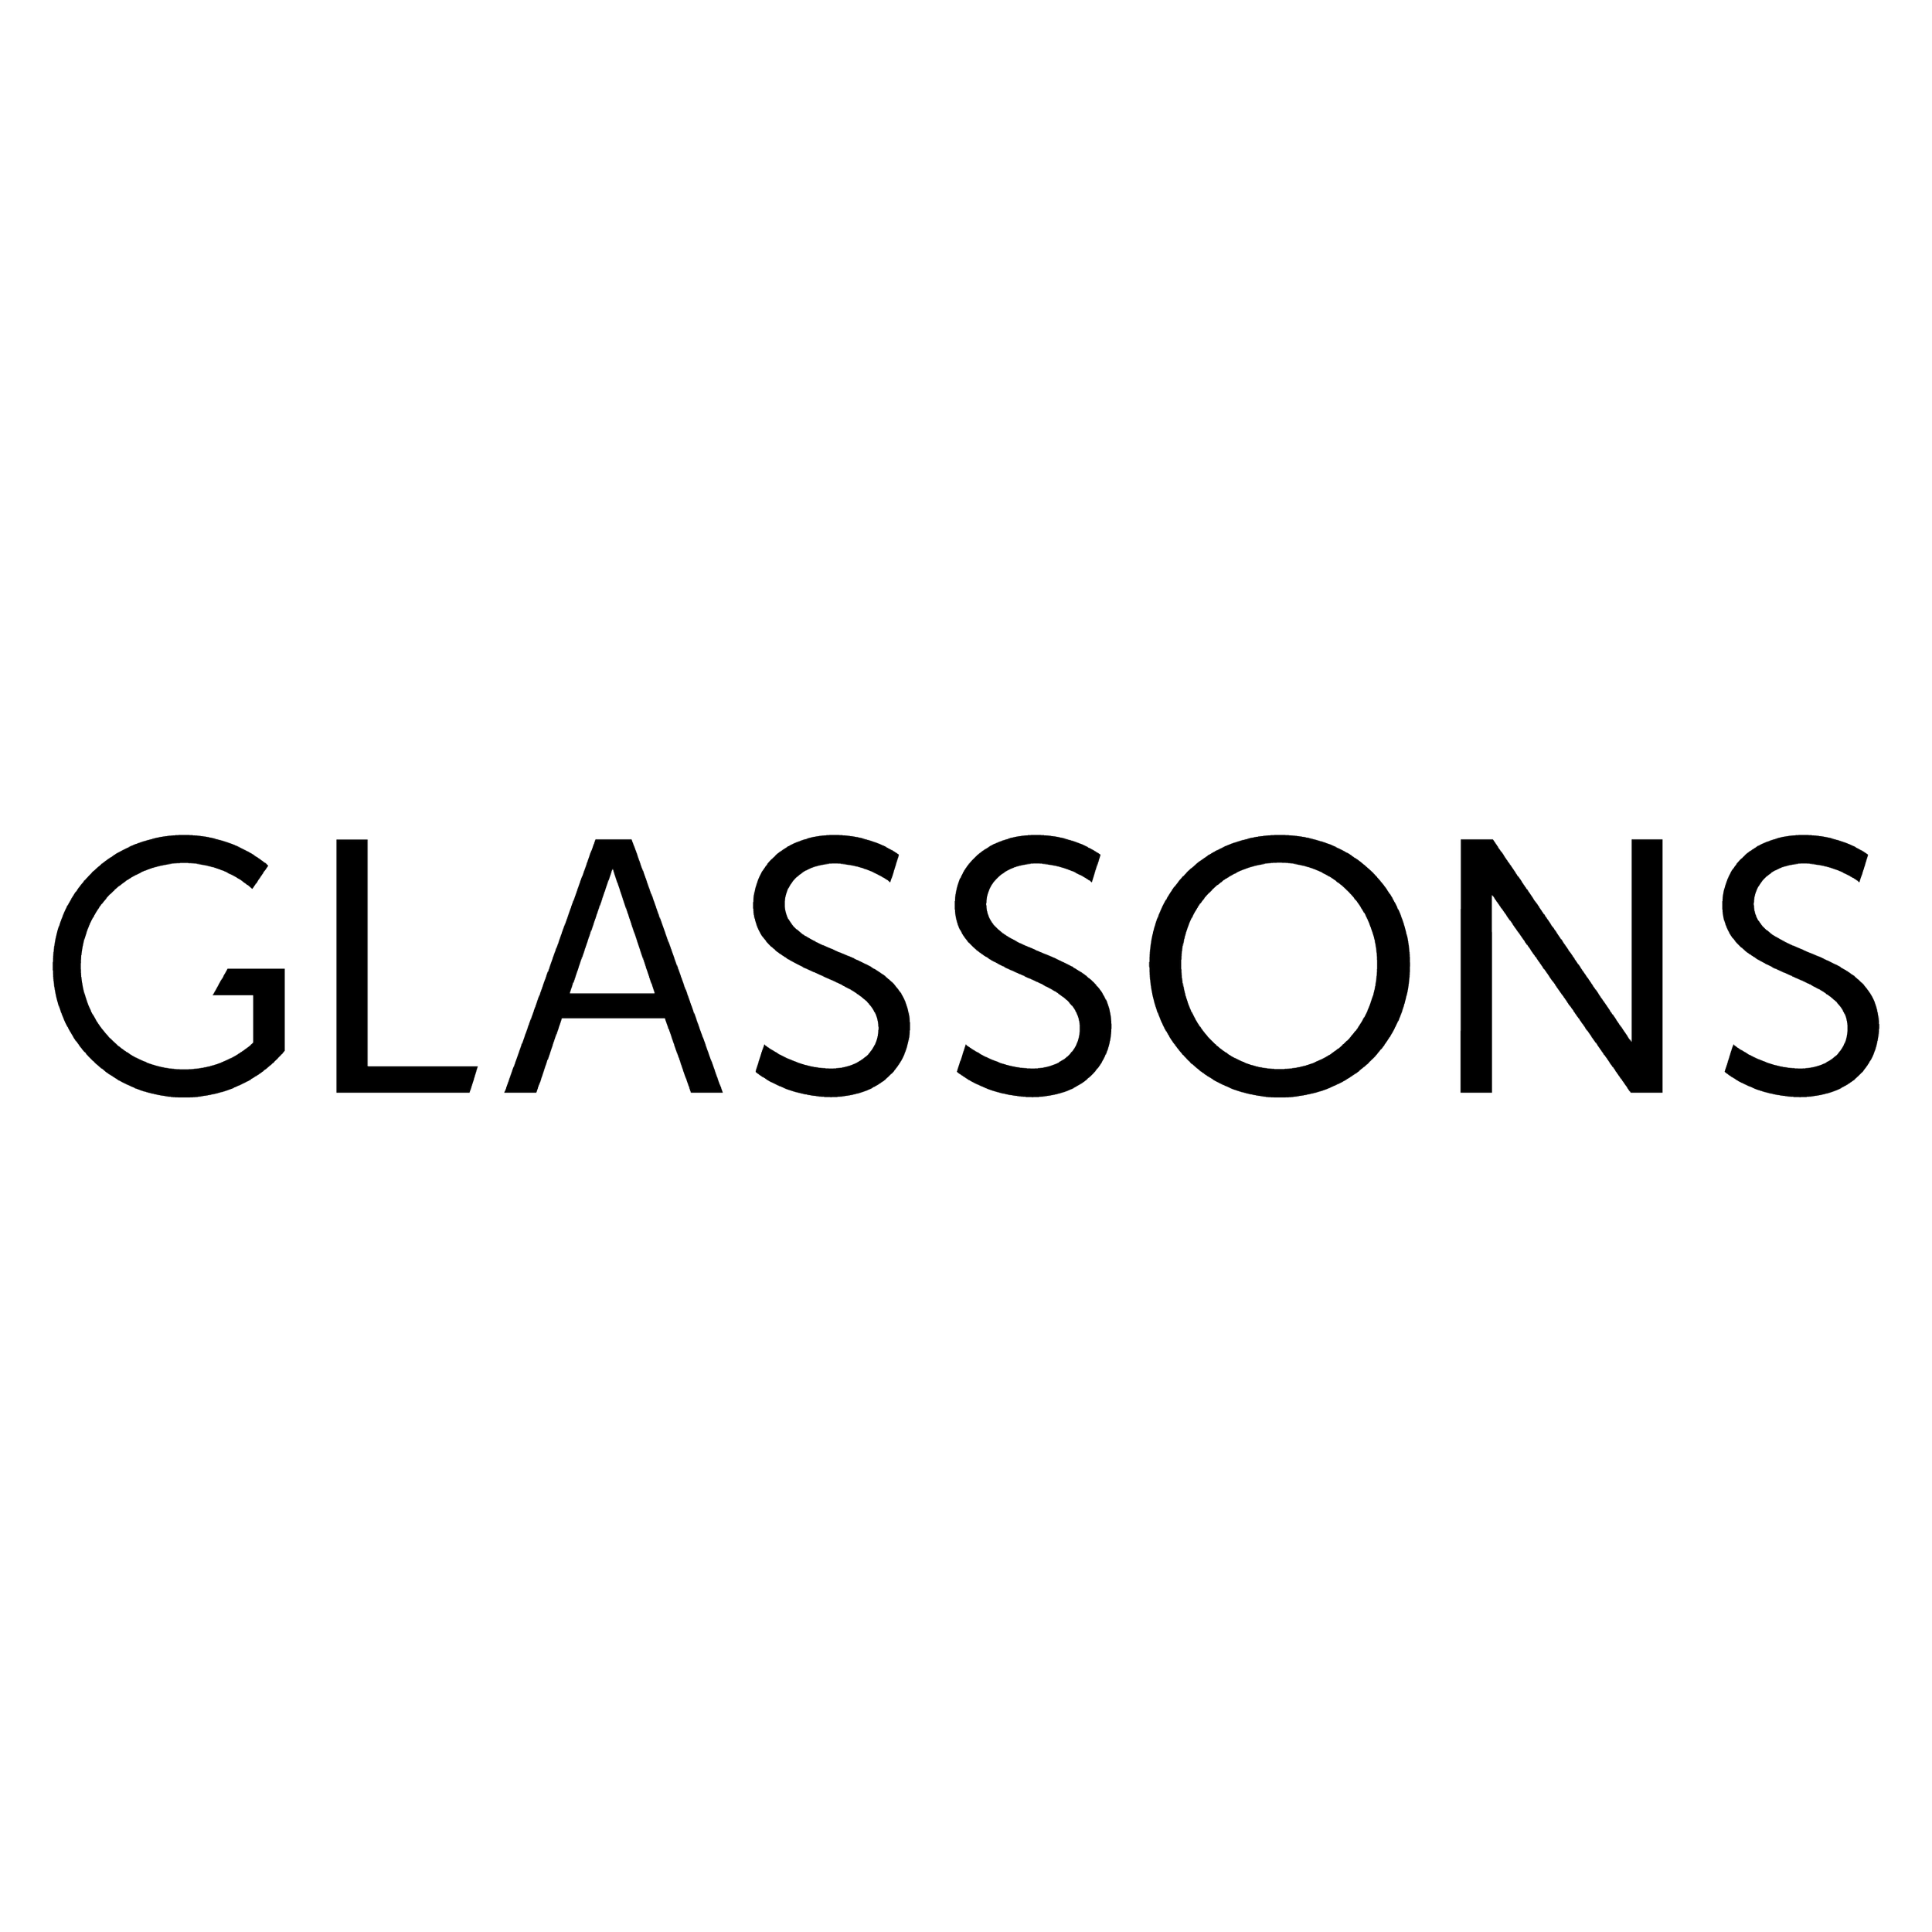 Glassons Logo.png